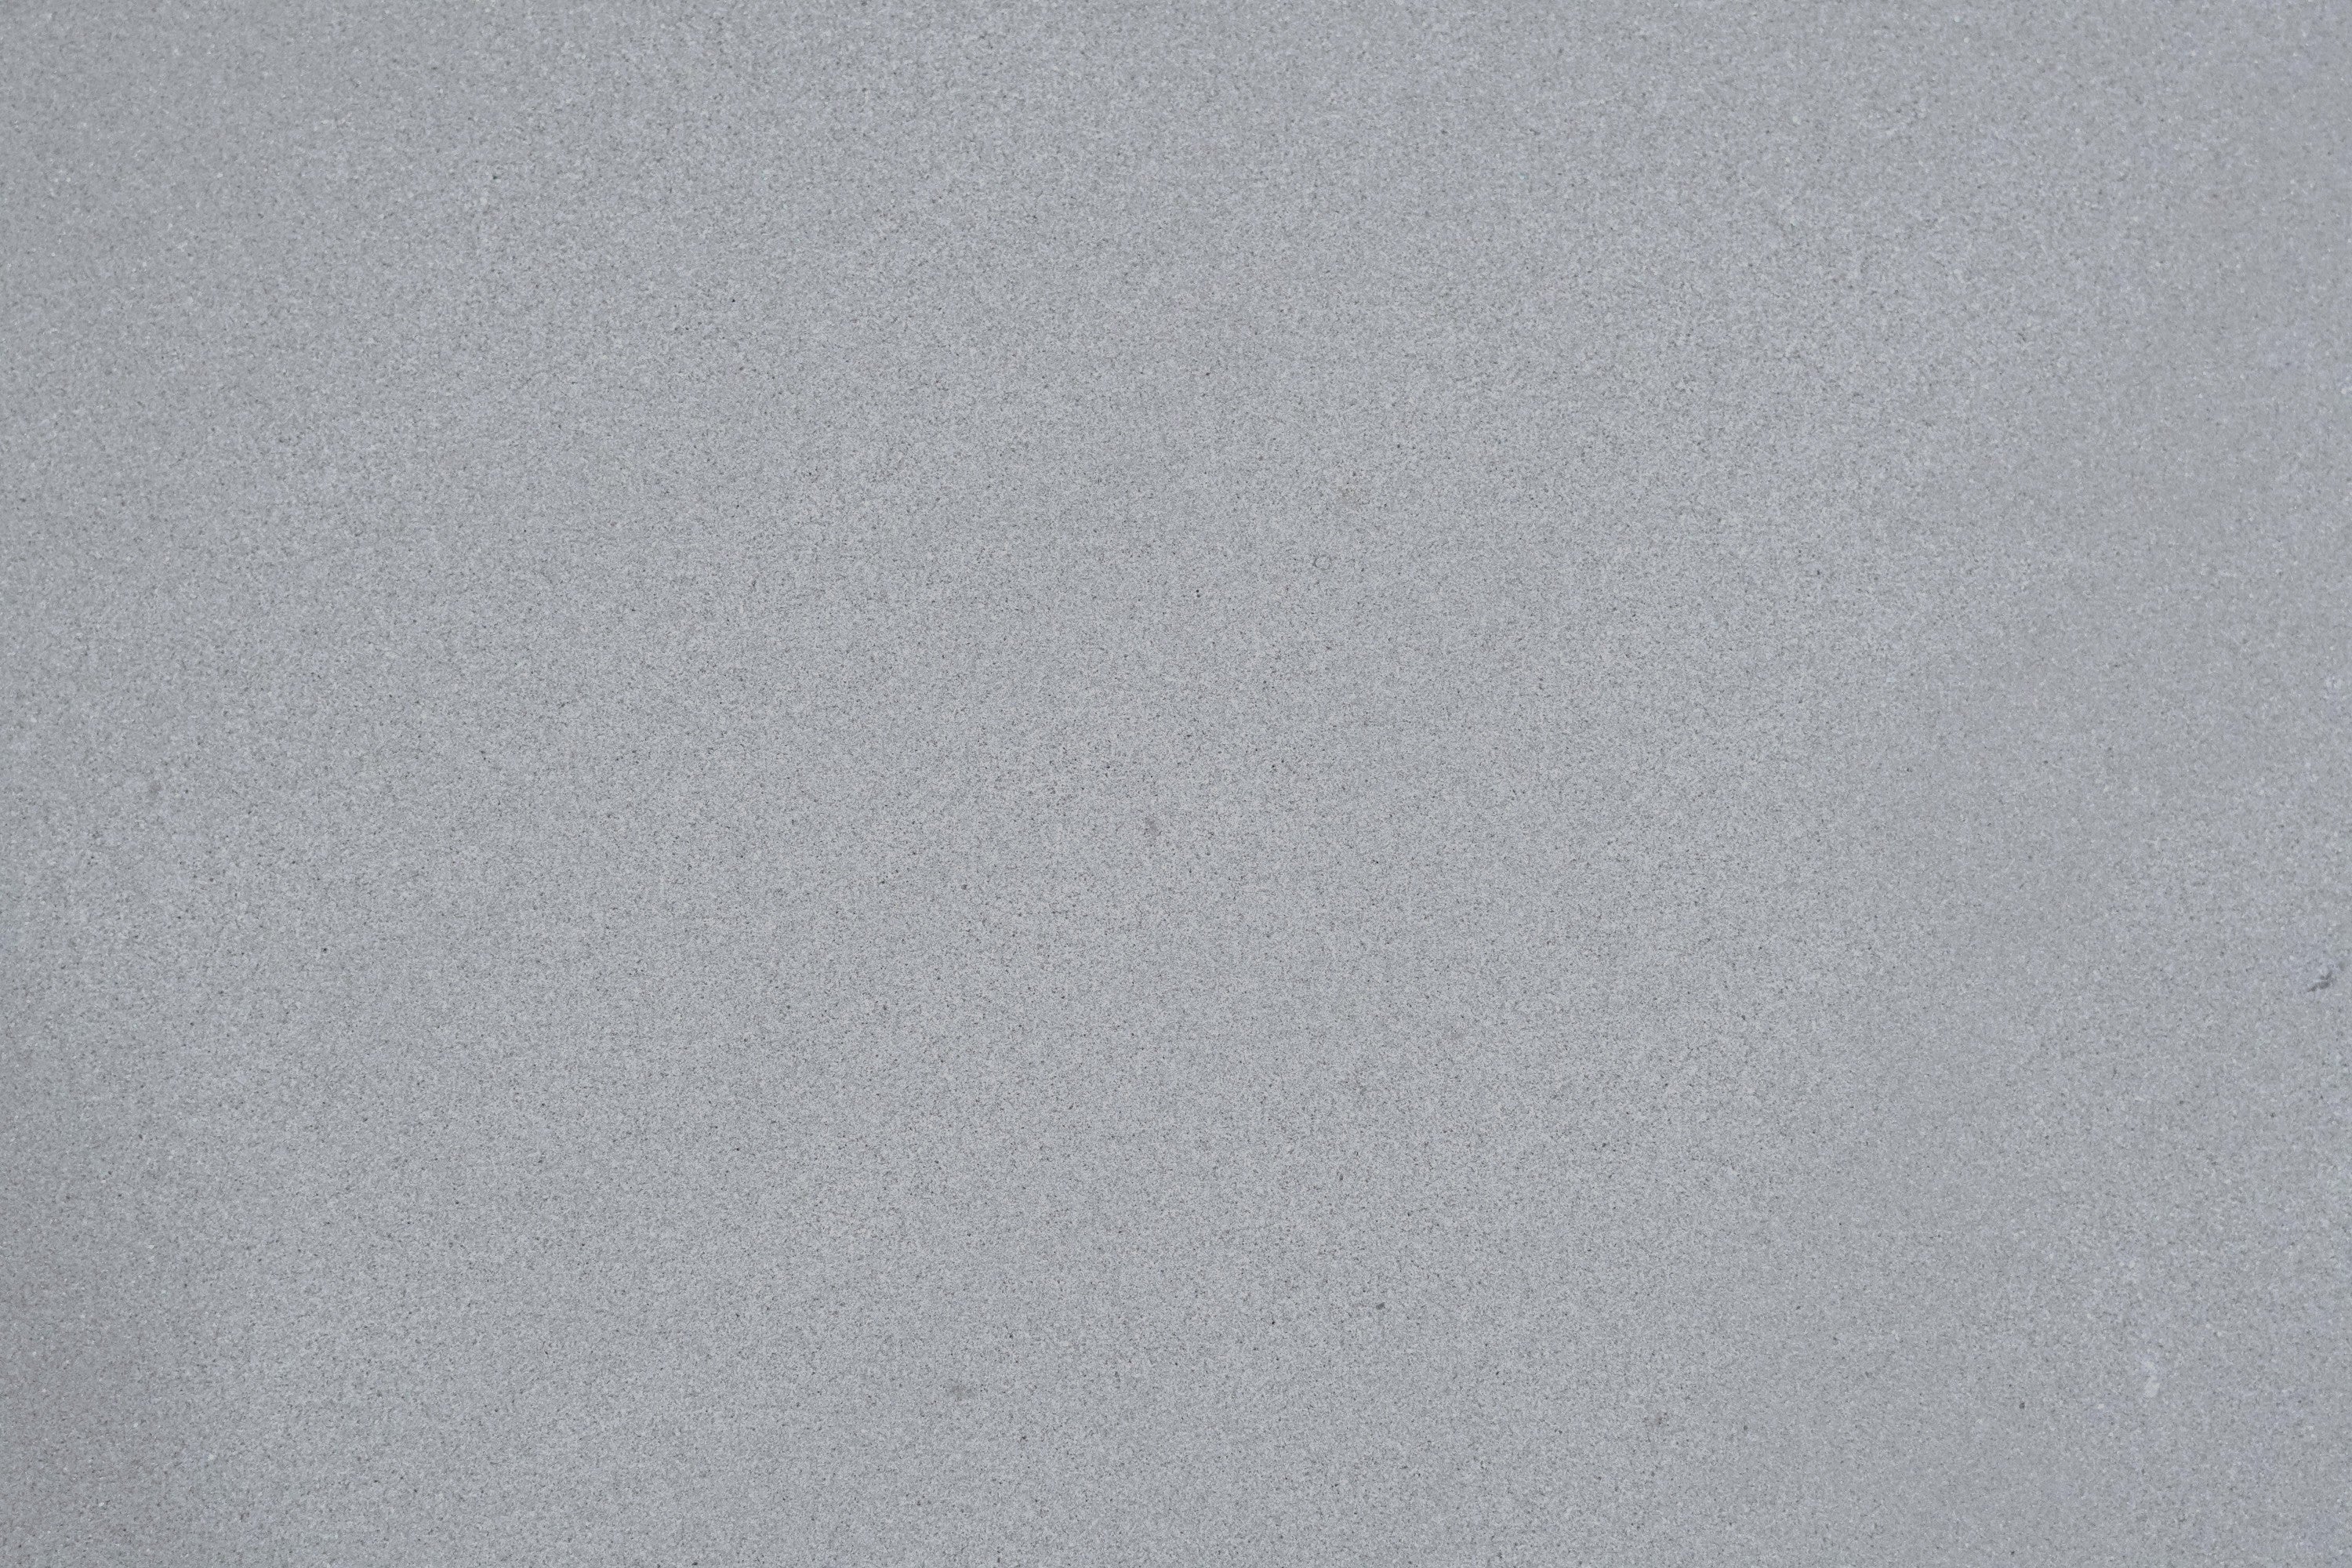 gray silk natural limestone field tile pietra serena width of 12 length of 24 and thickness of 0.5 sold to you by surface group international